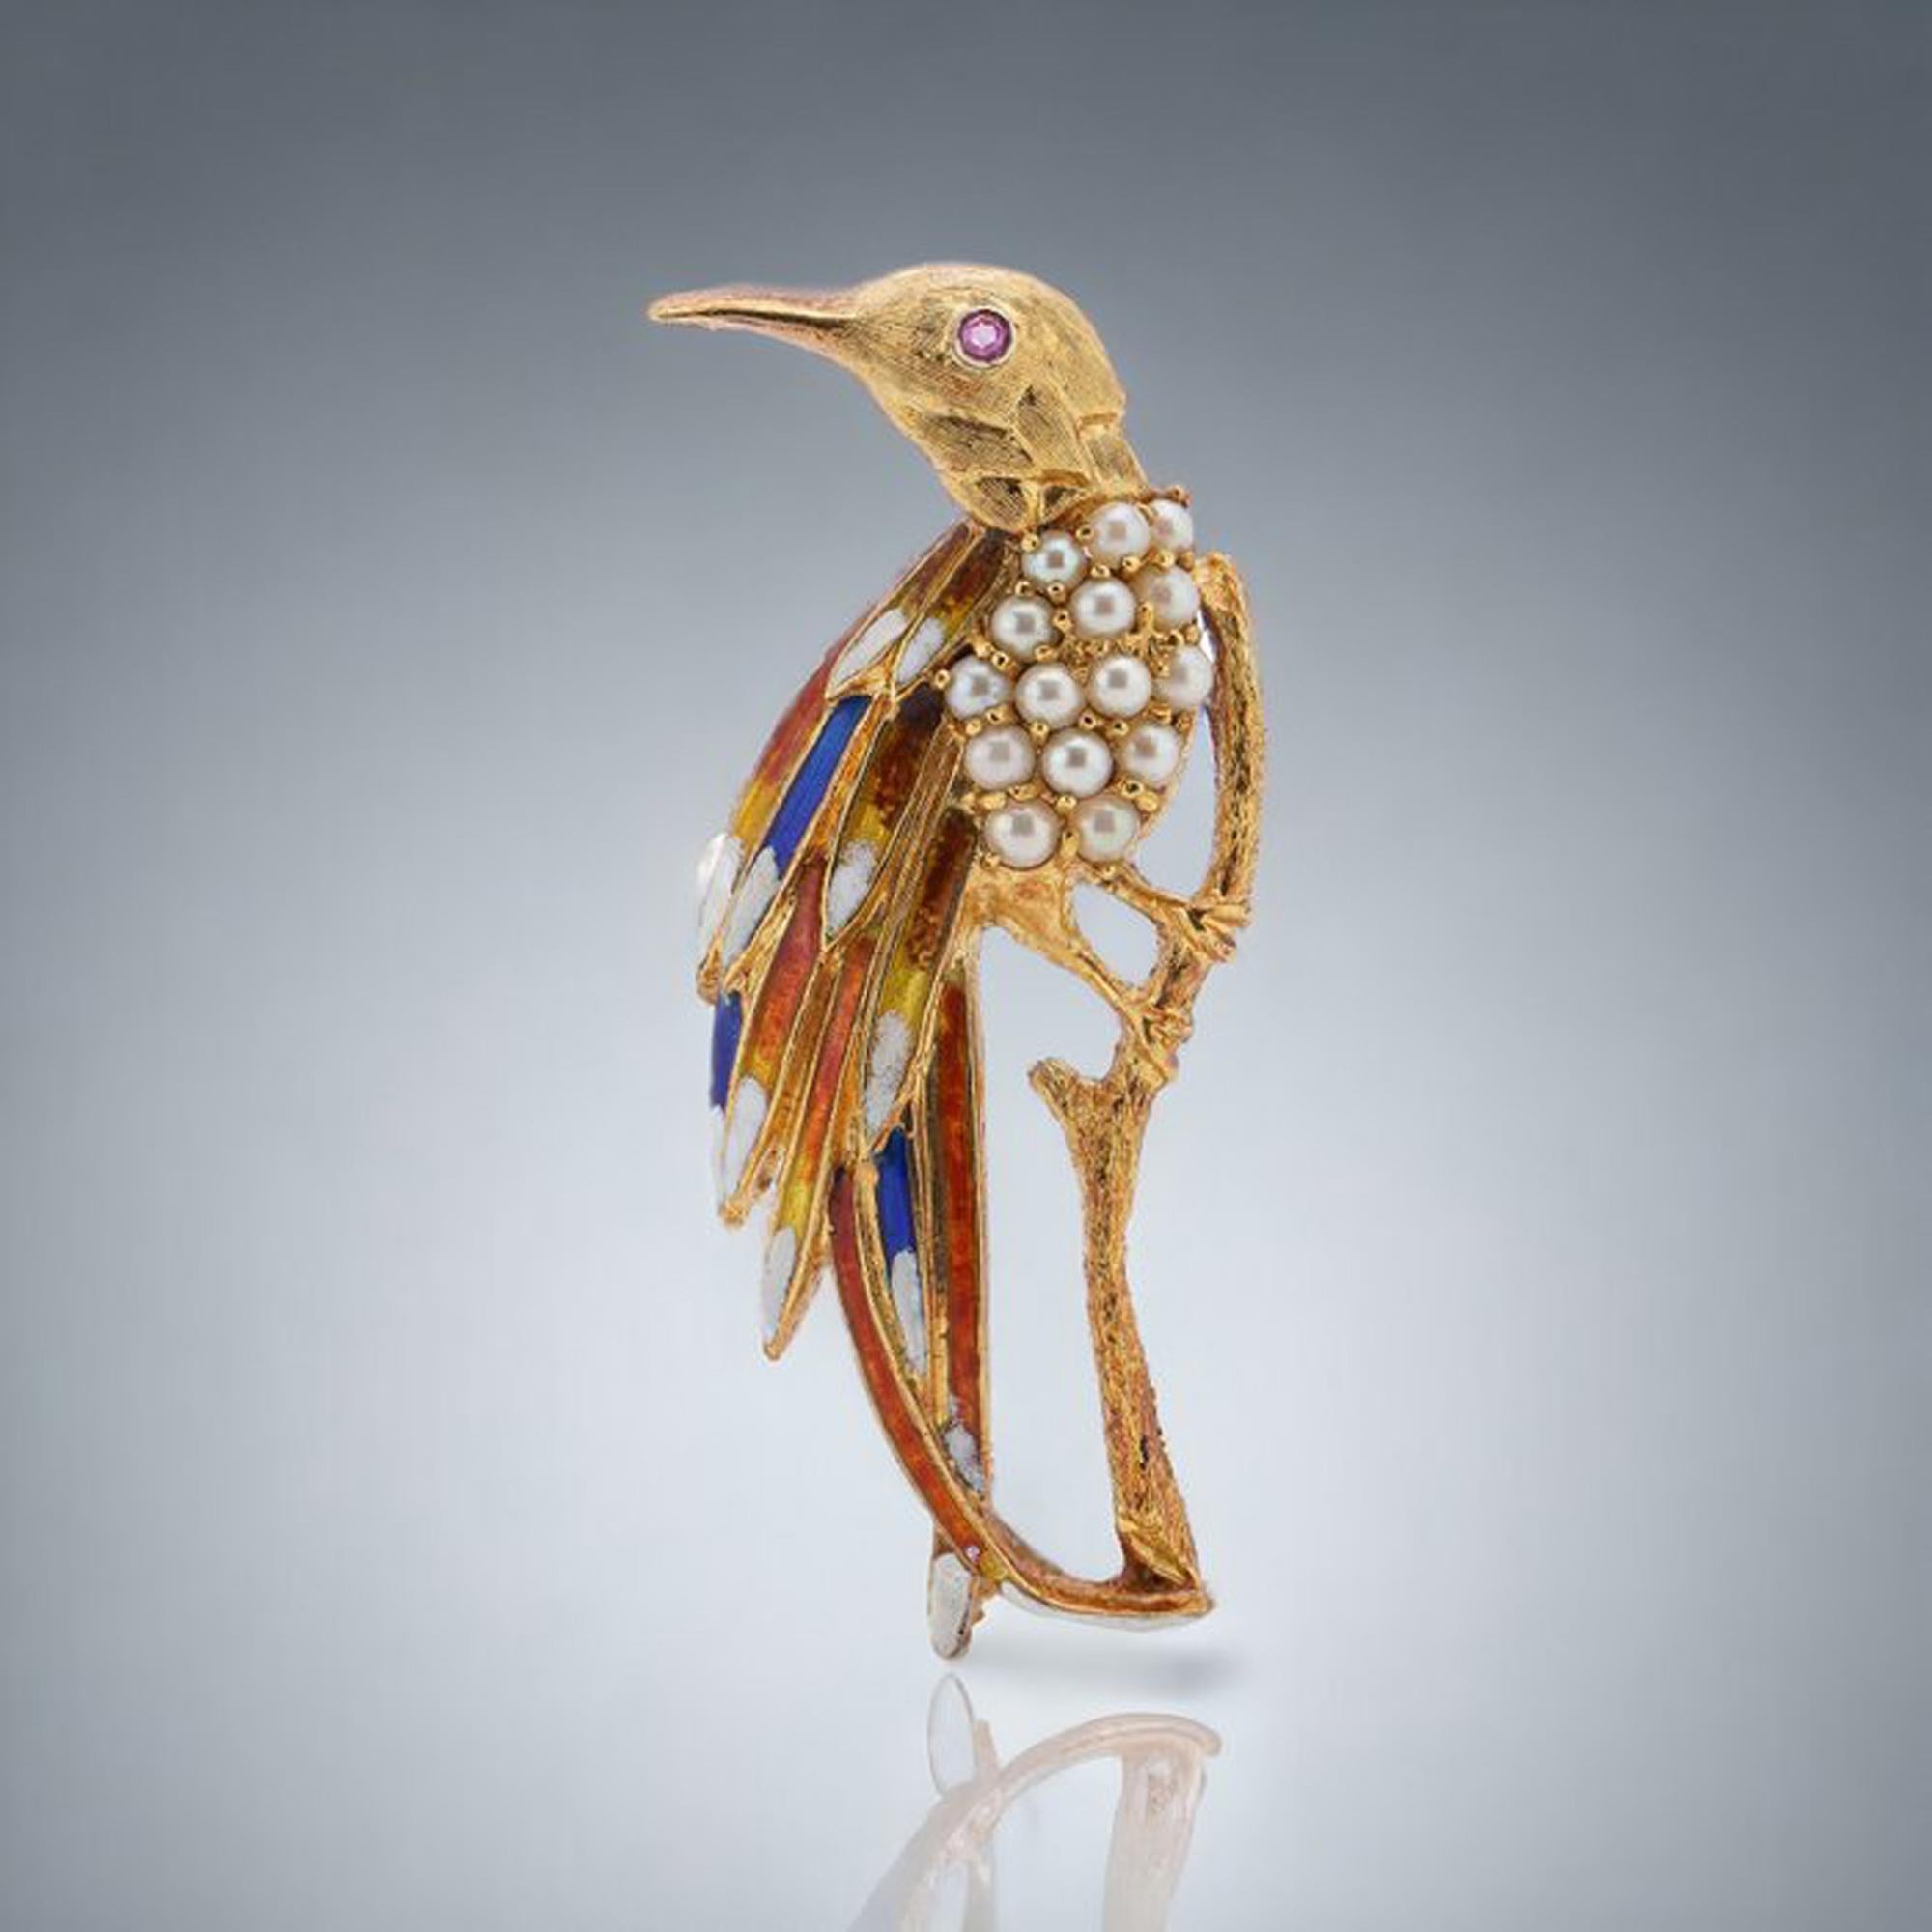 Mid-20th century 18kt gold bird brooch on a branch with colourful feathers.
Made in Europe mid-20th century.
Hallmarked 18KT Gold & 